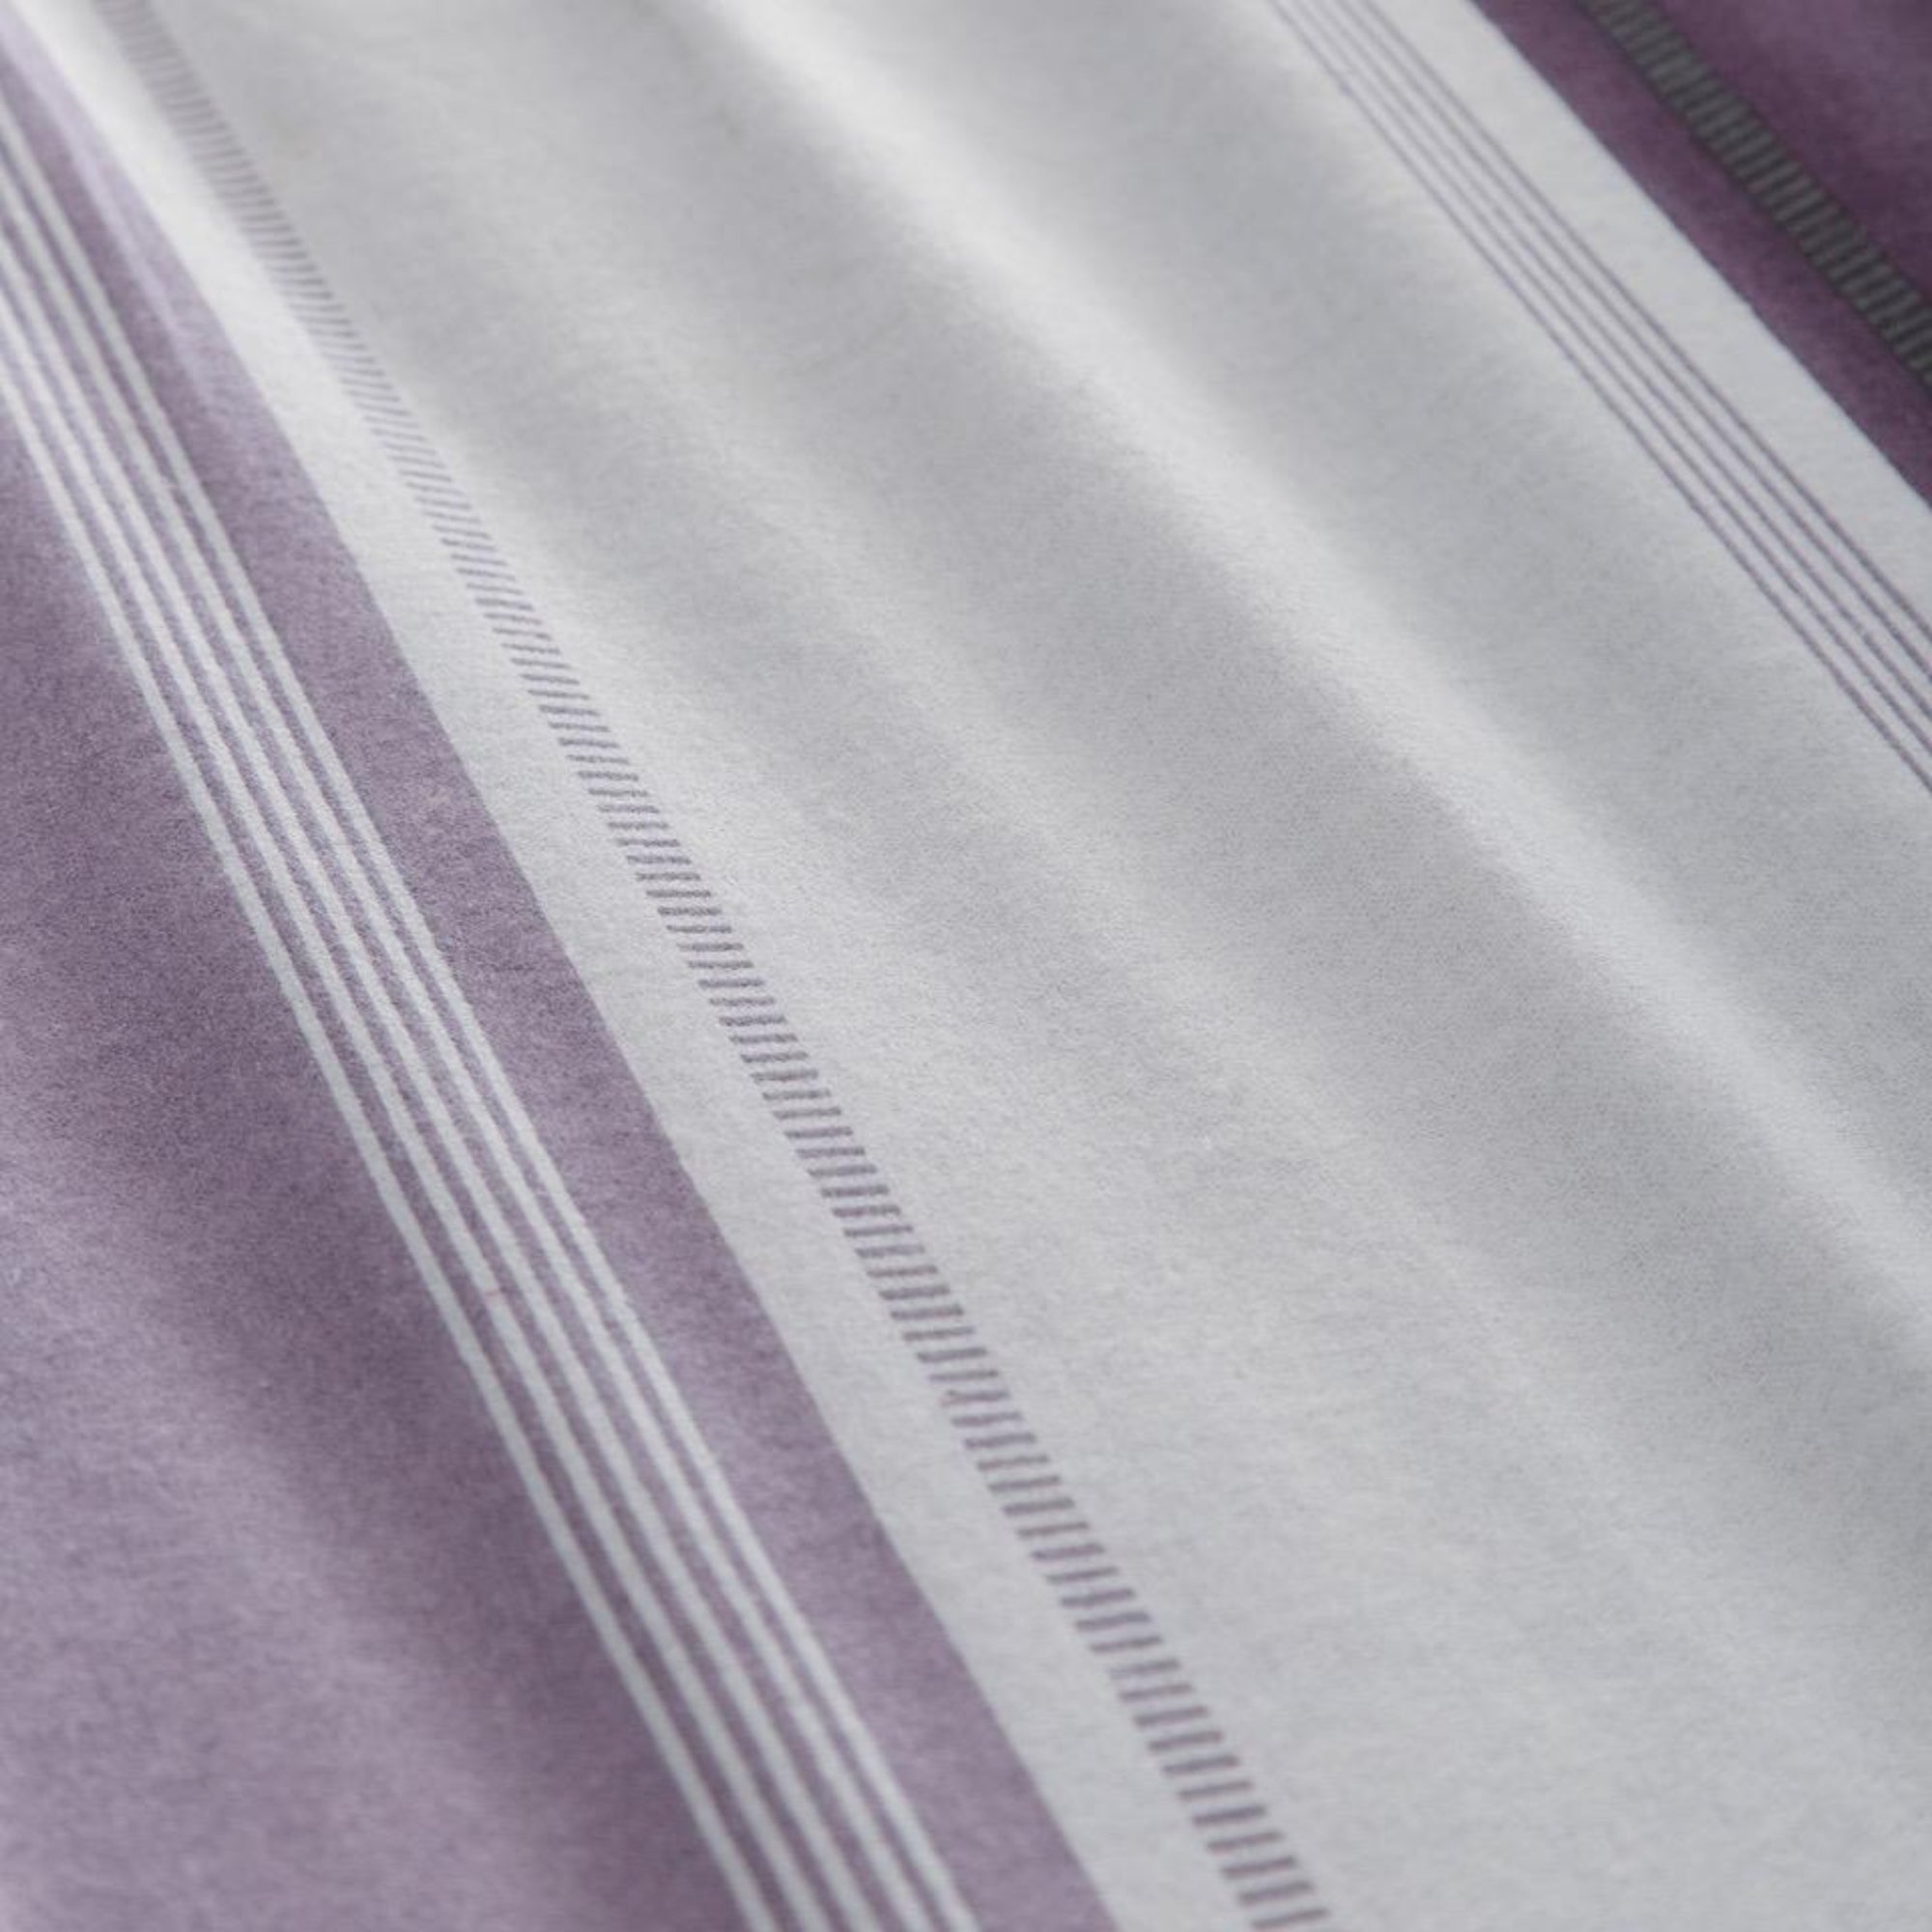 Duvet Cover Set Betley Brushed by Fusion Snug in Plum